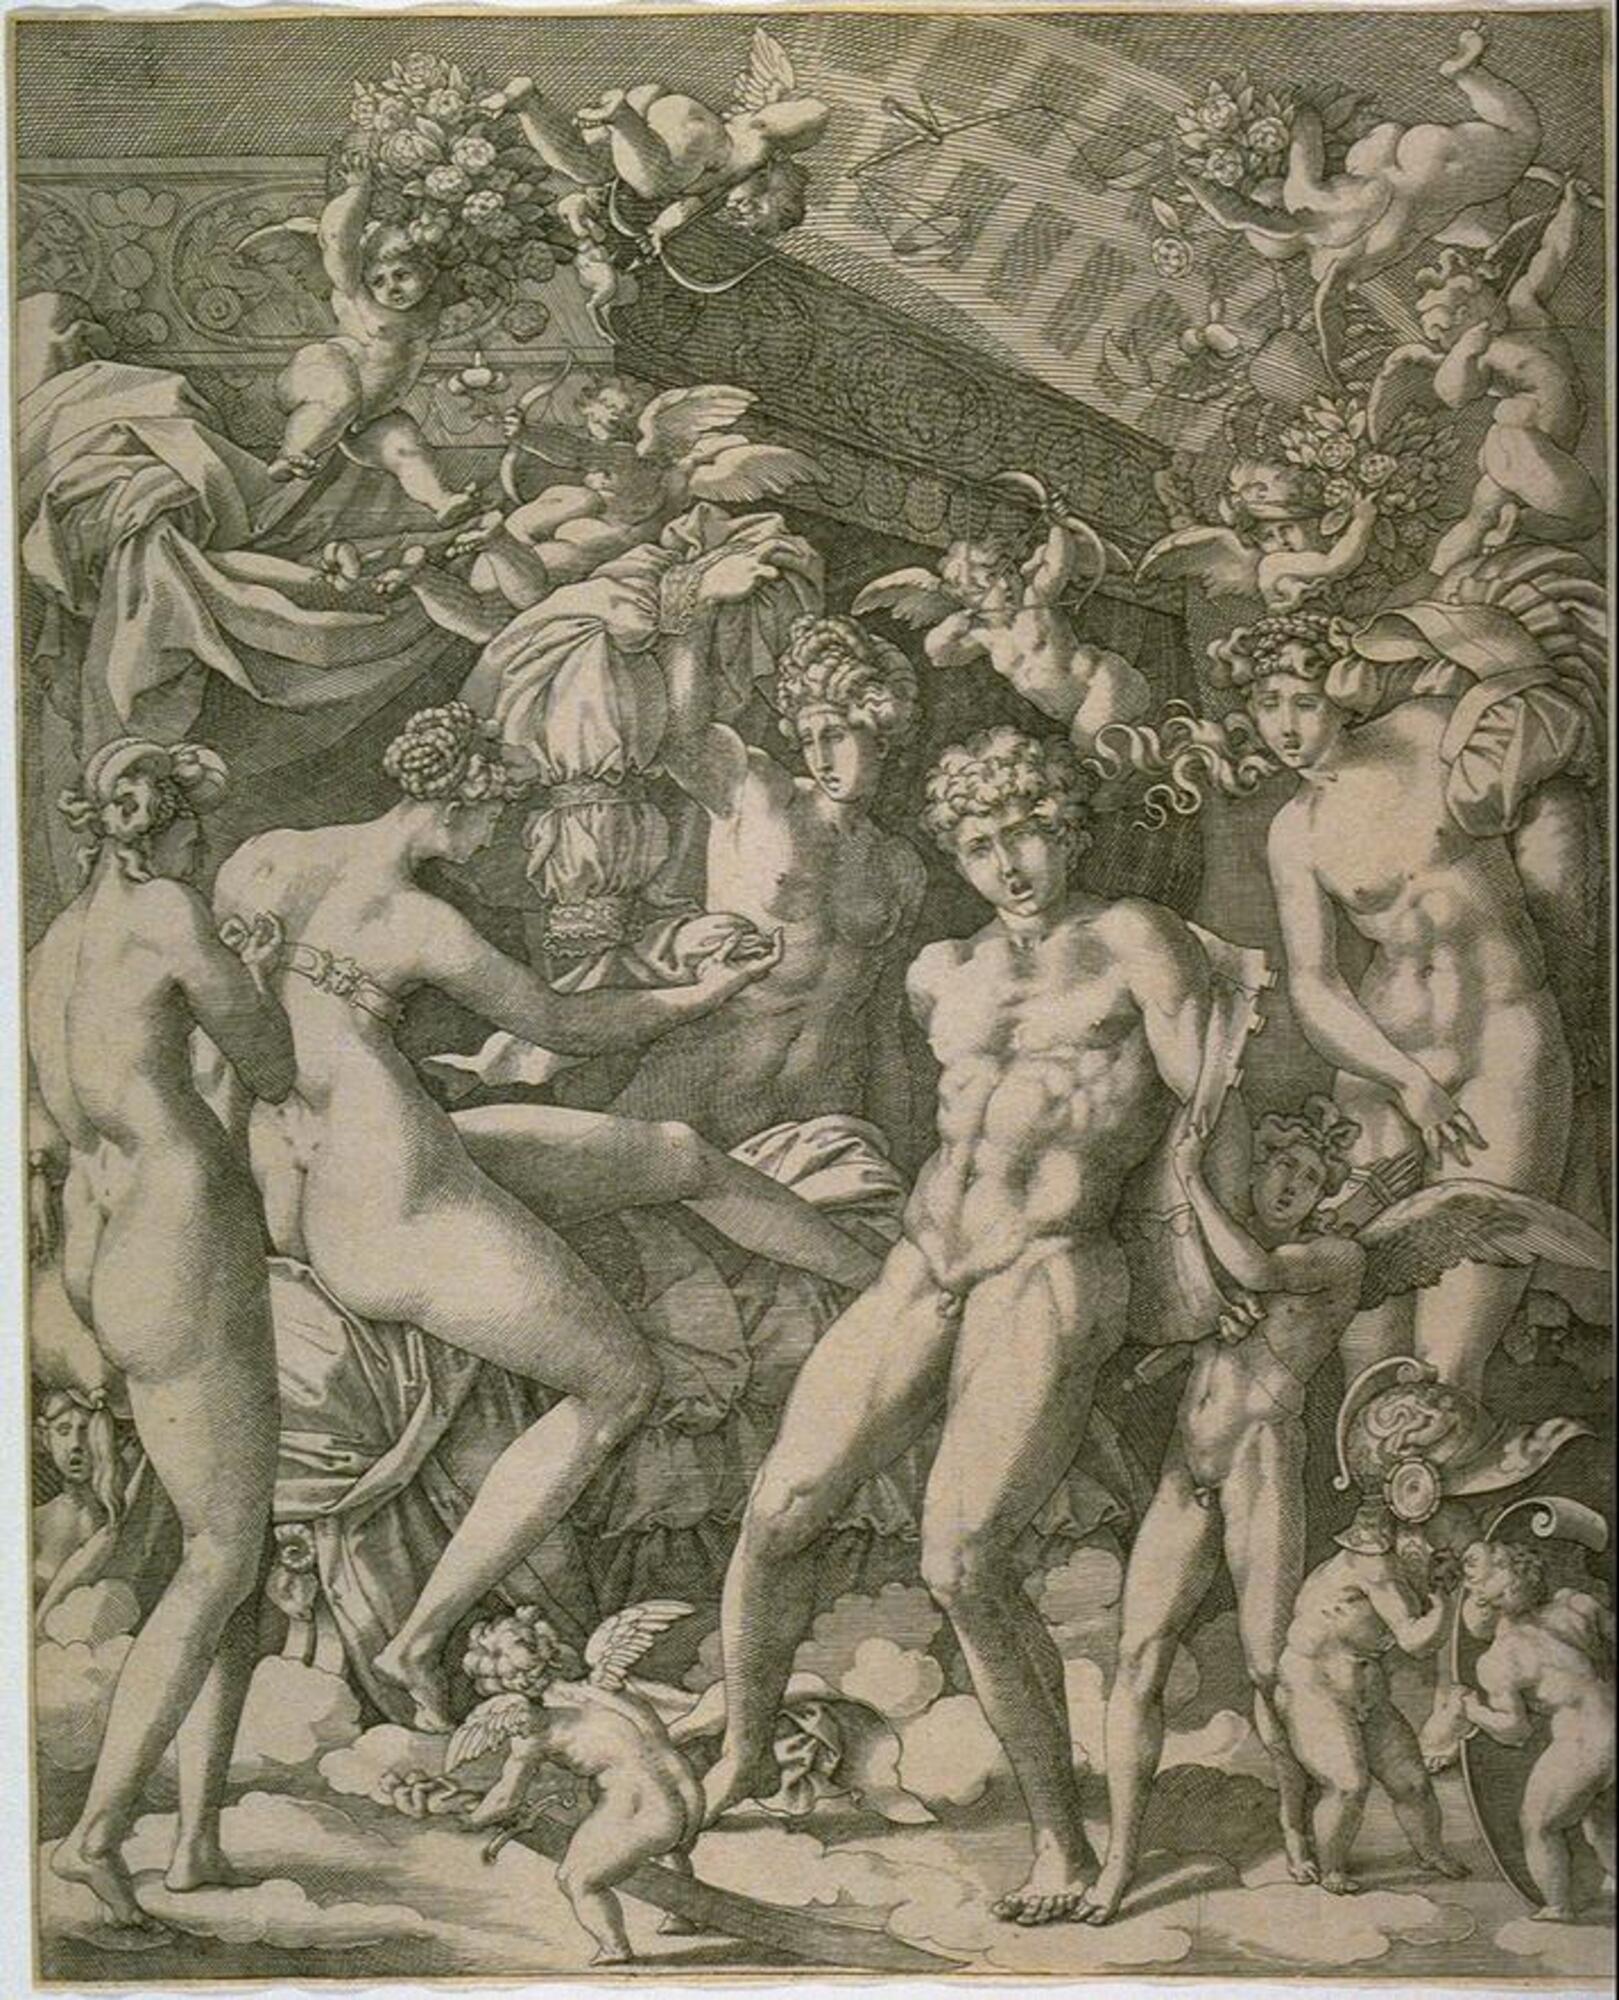 The nude figures of four women, a man, a winged boy, and numerous putti stand in front of a curtained bed. The man stands near the center of the crowd and gasps, apparently in shock, as his jacket is pulled off by the young boy behind him. The woman seated on the bed beckons toward the man.